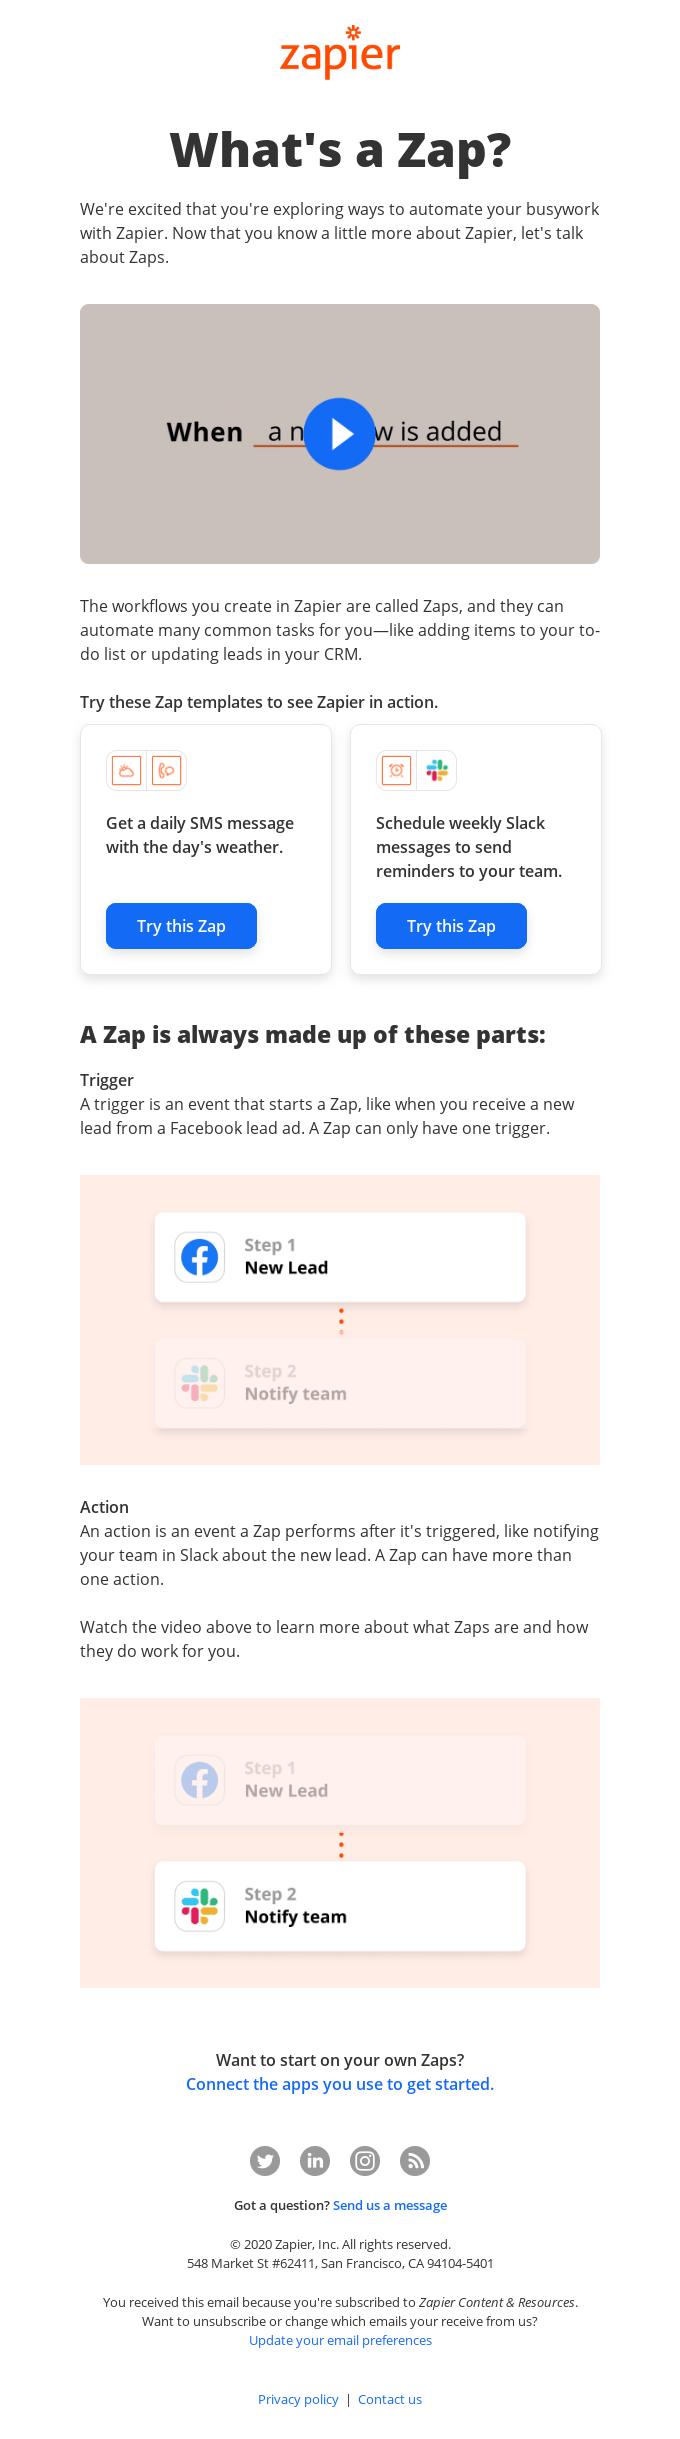 Welcome email from Zapier.